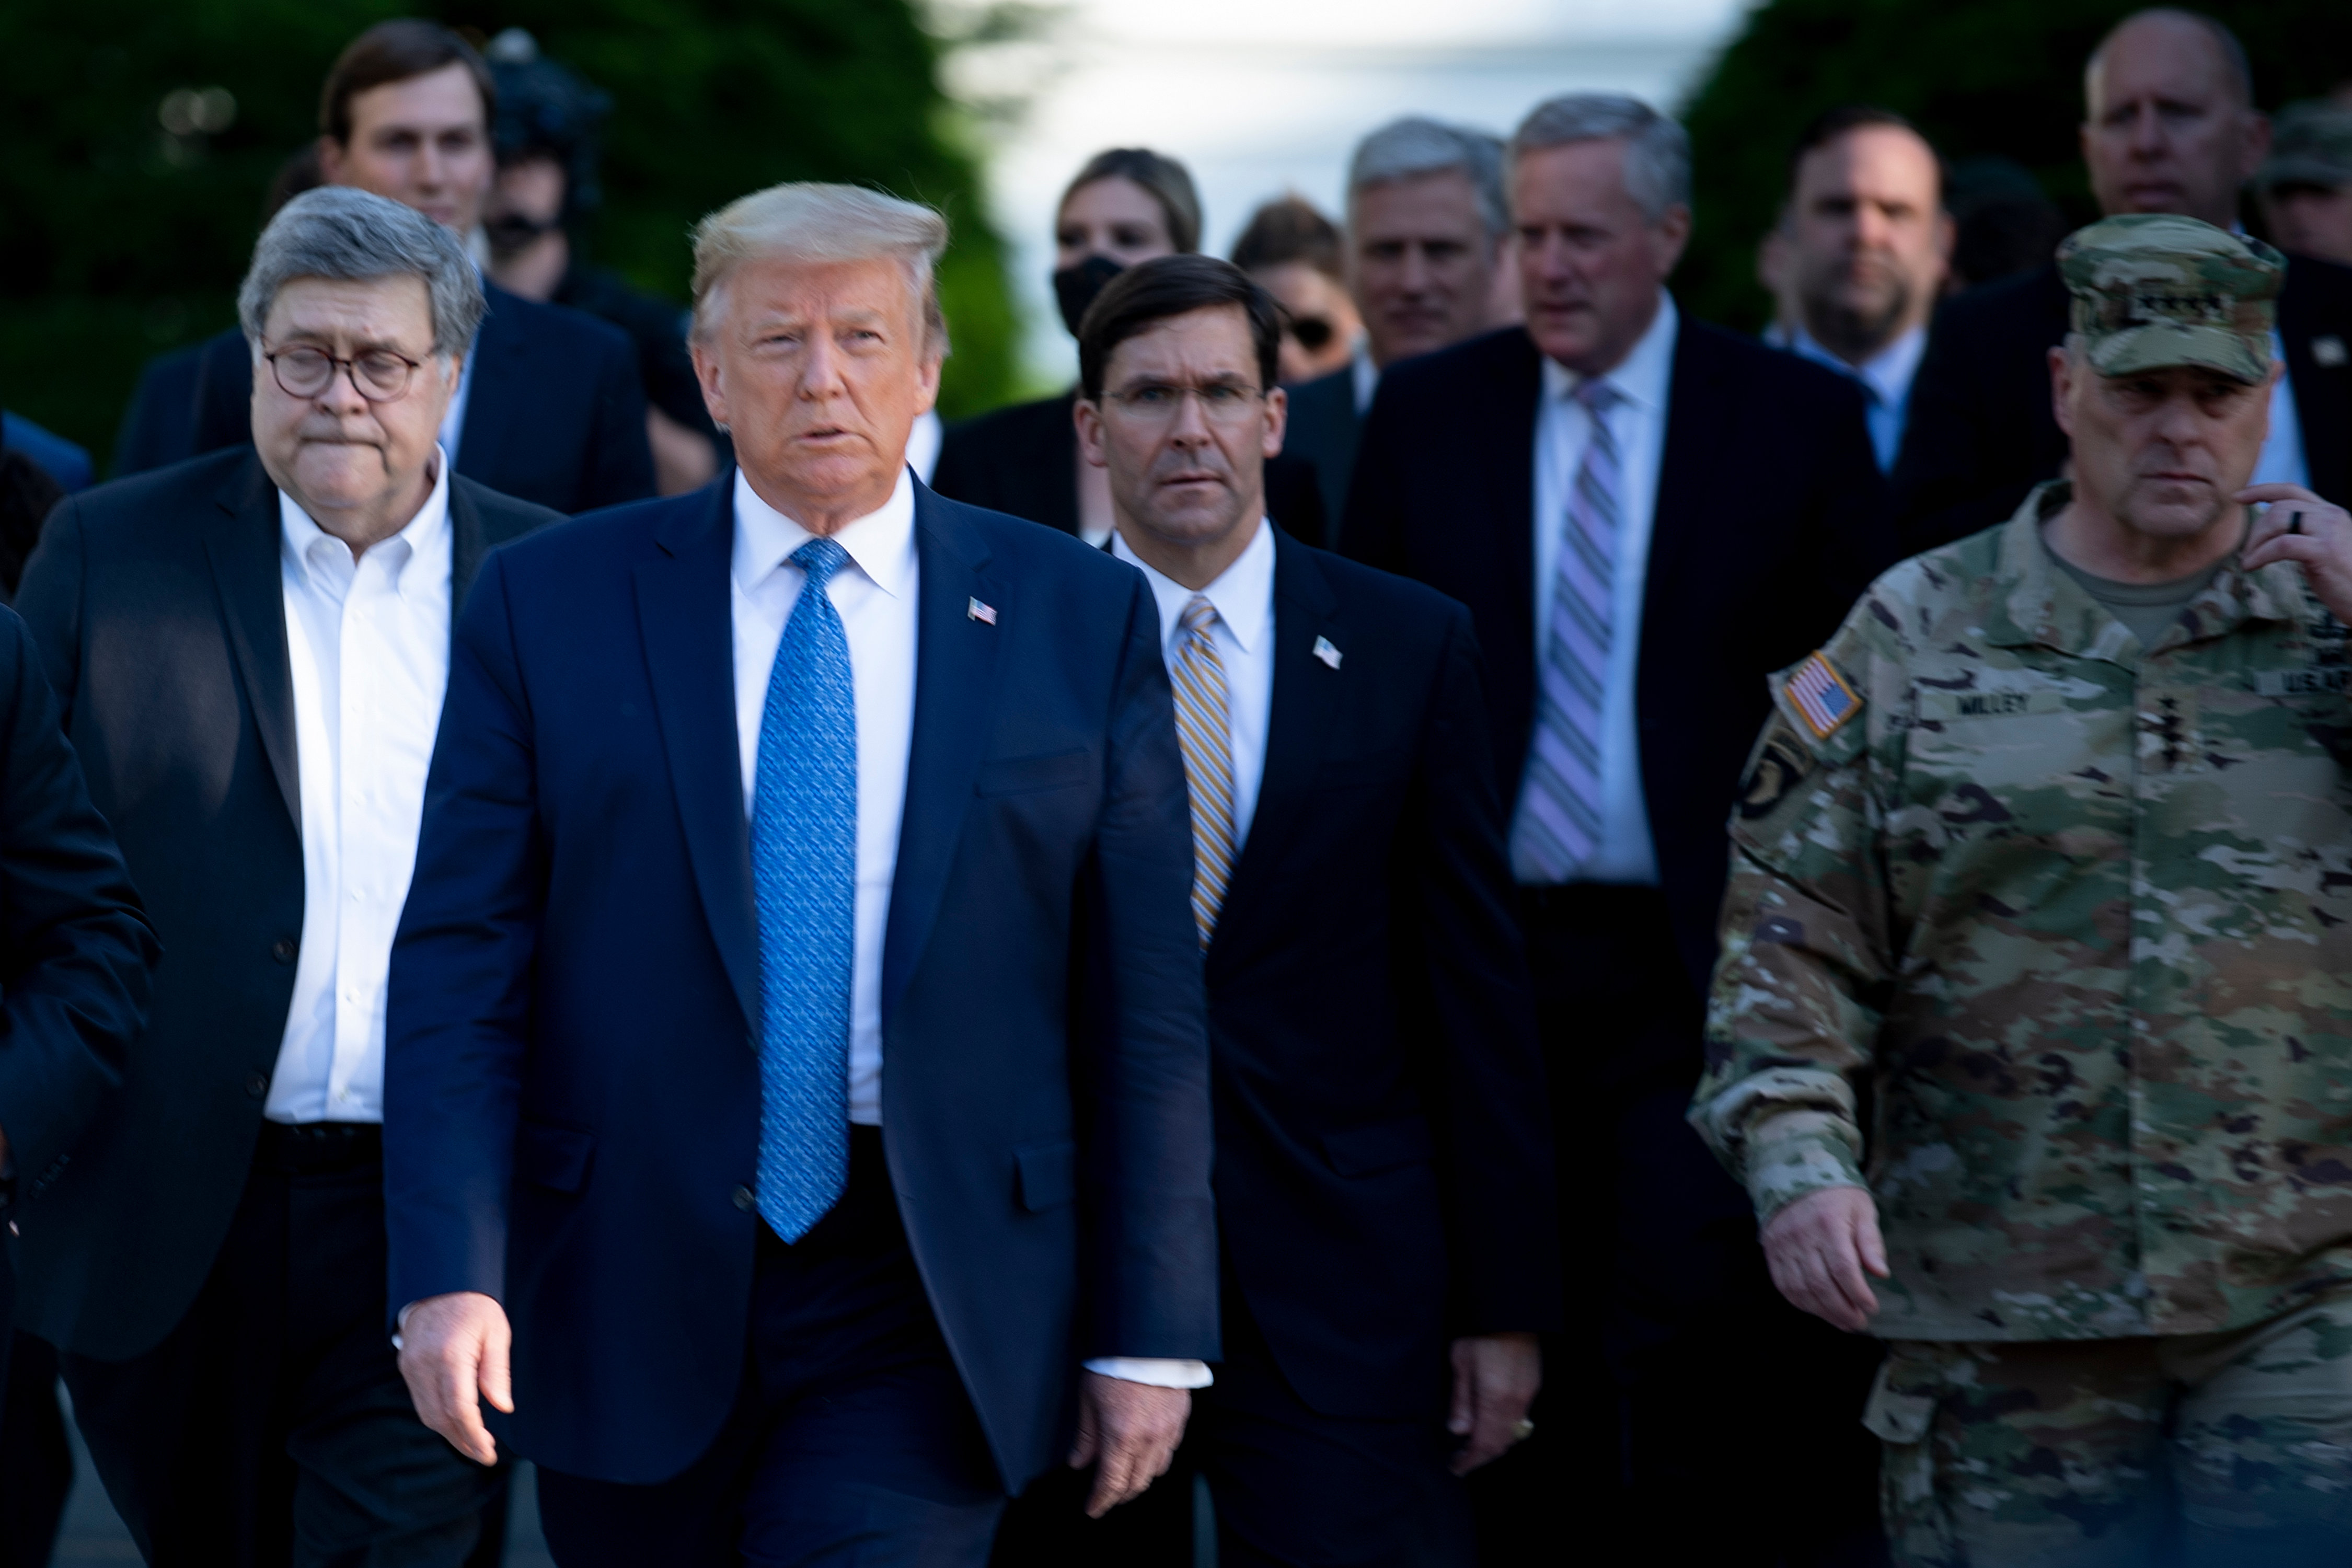 US President Donald Trump walks with US Attorney General William Barr (L), US Secretary of Defense Mark T. Esper (C), Chairman of the Joint Chiefs of Staff Mark A. Milley (R), and others from the White House to visit St. John's Church after the area was cleared of people protesting the death of George Floyd June 1, 2020, in Washington, DC. - US President Donald Trump was due to make a televised address to the nation on Monday after days of anti-racism protests against police brutality that have erupted into violence. The White House announced that the president would make remarks imminently after he has been criticized for not publicly addressing in the crisis in recent days. (Photo by BRENDAN SMIALOWSKI/AFP via Getty Images)